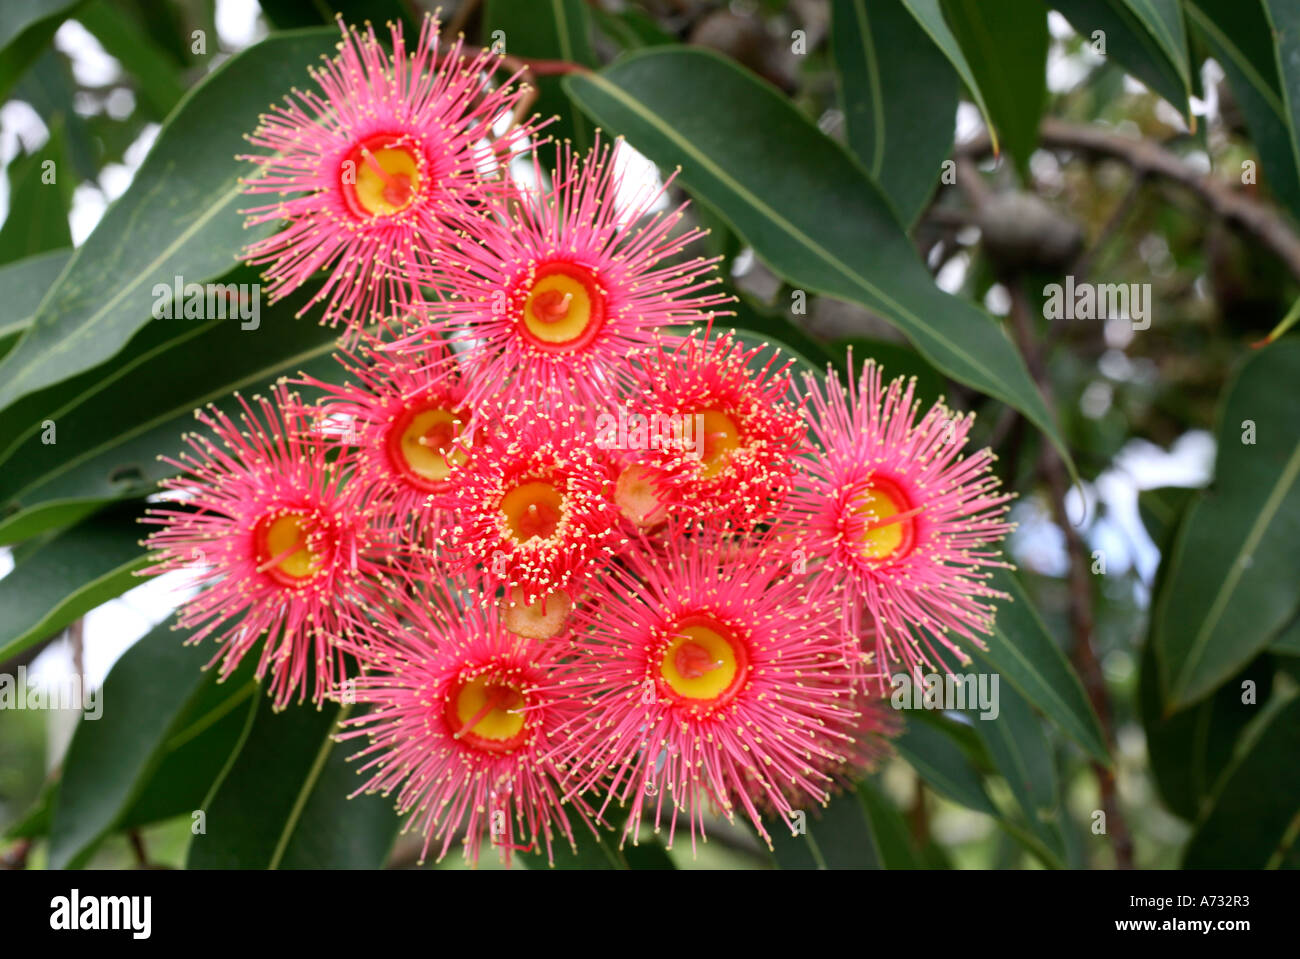 Pink Eucalypt or gum tree blossoms Stock Photo